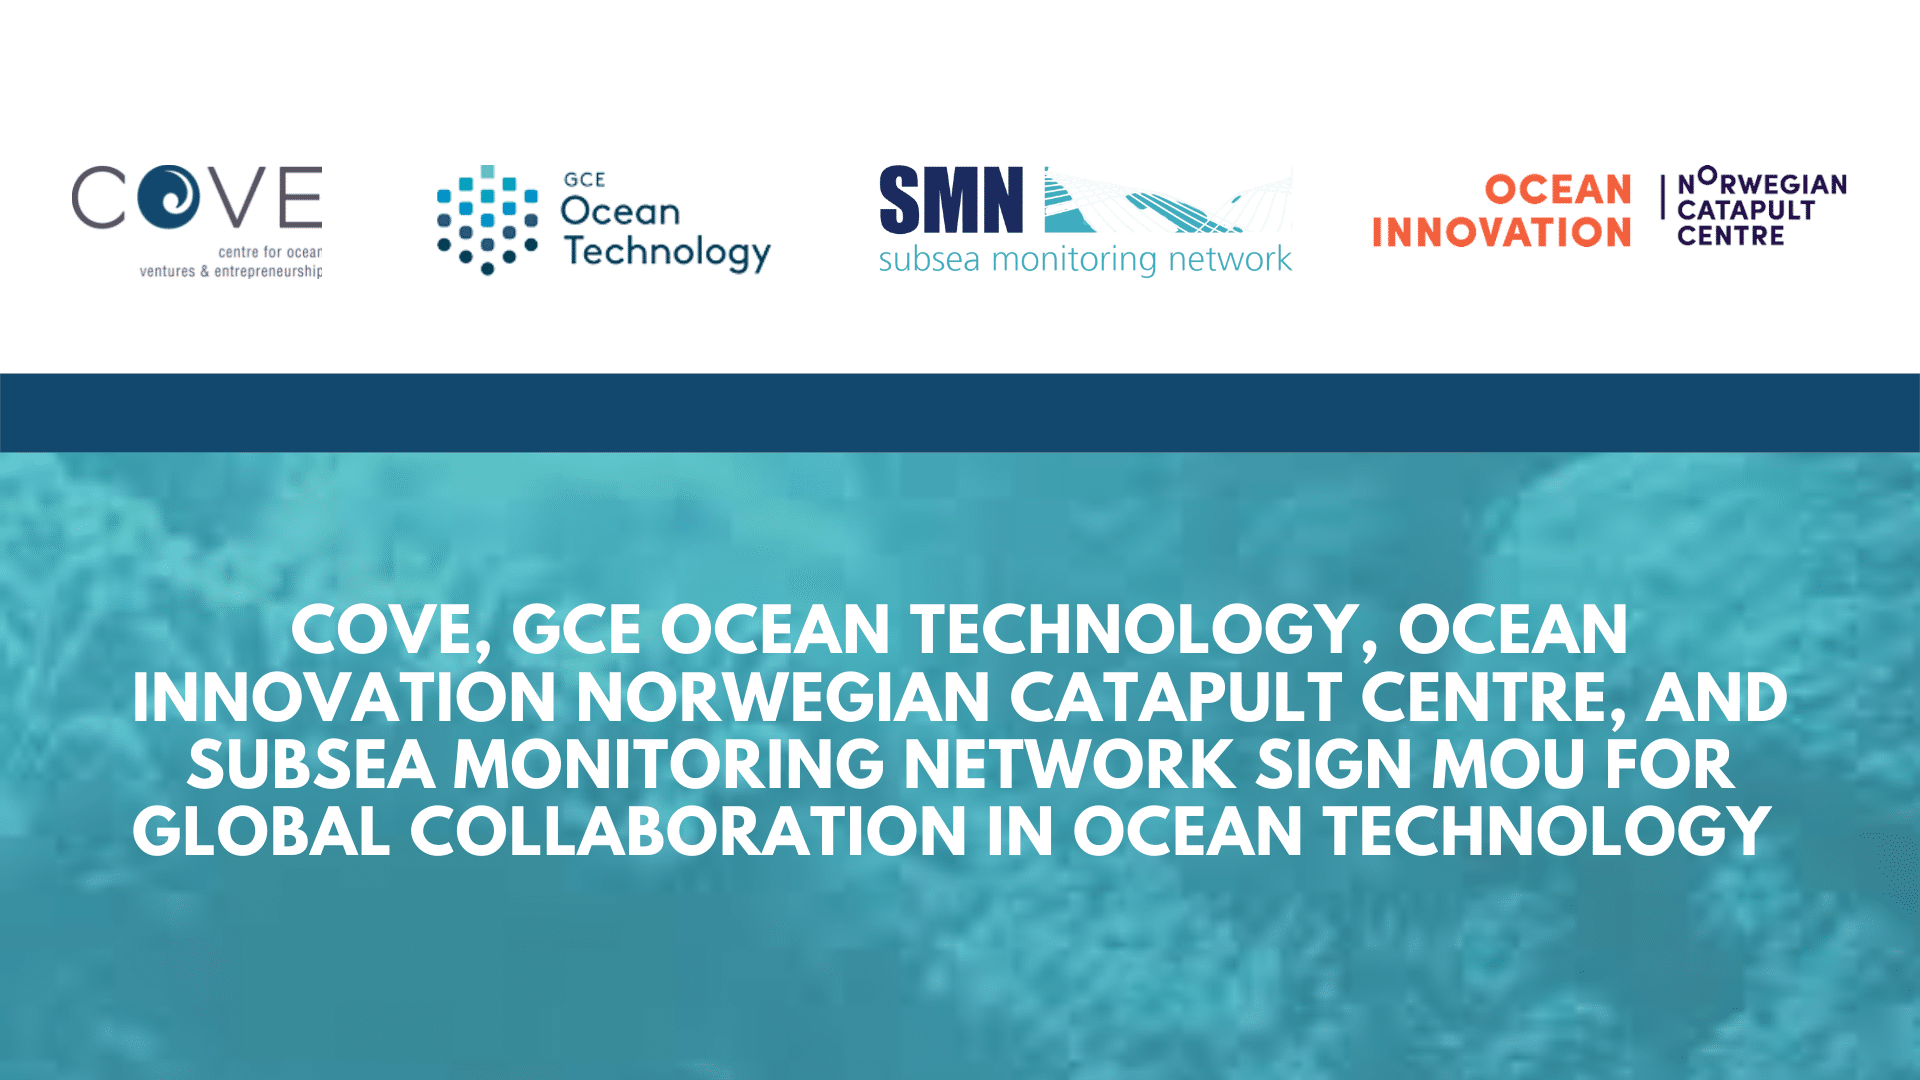 COVE, GCE Ocean Technology, Ocean Innovation Norwegian Catapult Centre, and Subsea Monitoring Network sign MOU for global collaboration in ocean technology